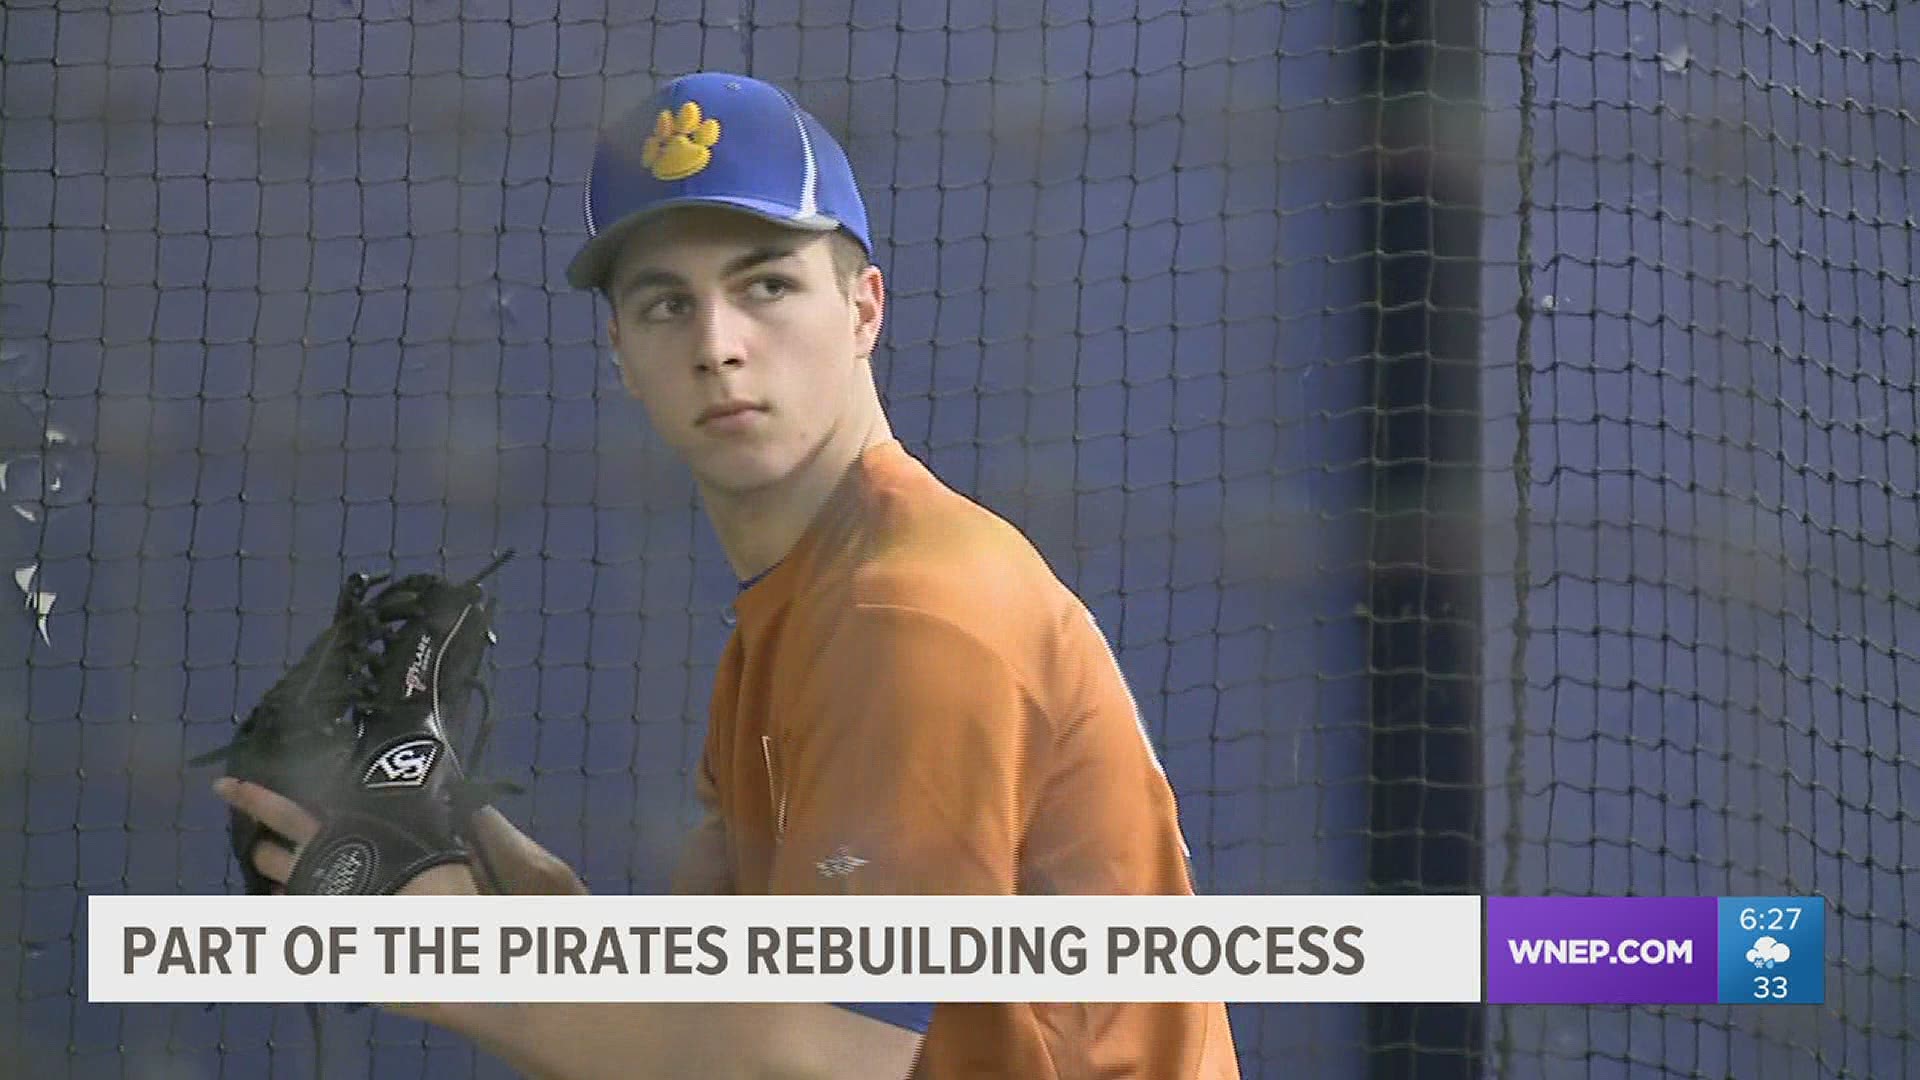 Kranick pitched at Valley View high-school then was drafted by the Pittsburgh PIrates